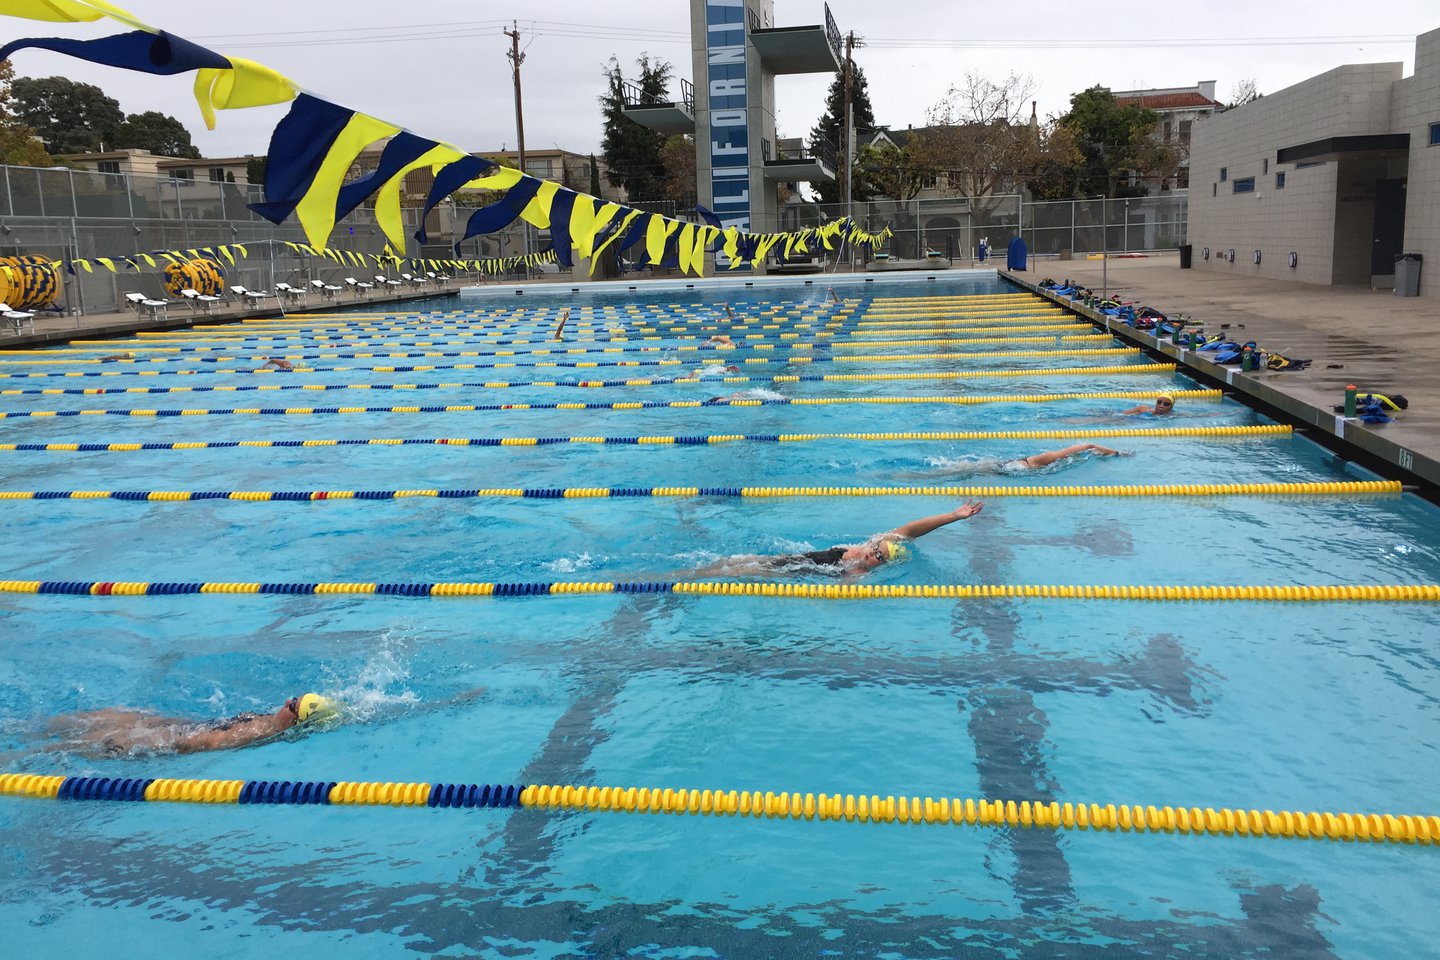 Photo of the new pool with blue-and-gold lane lines and athletes practicing in it.